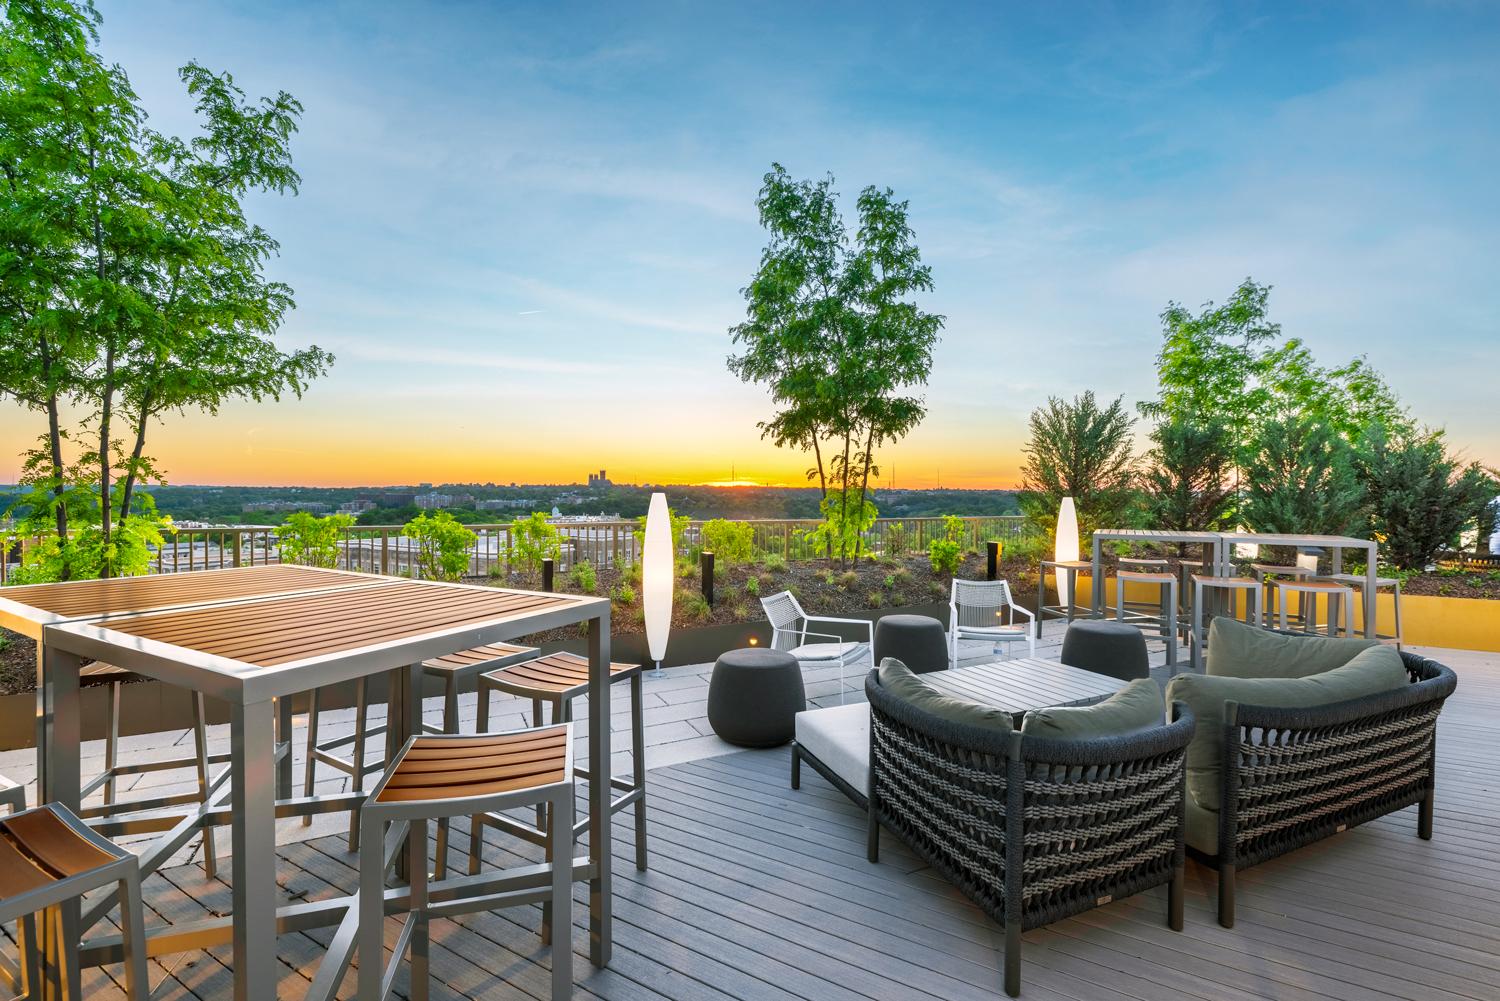 Soak in sweeping views of D.C. on our coveted rooftop terrace